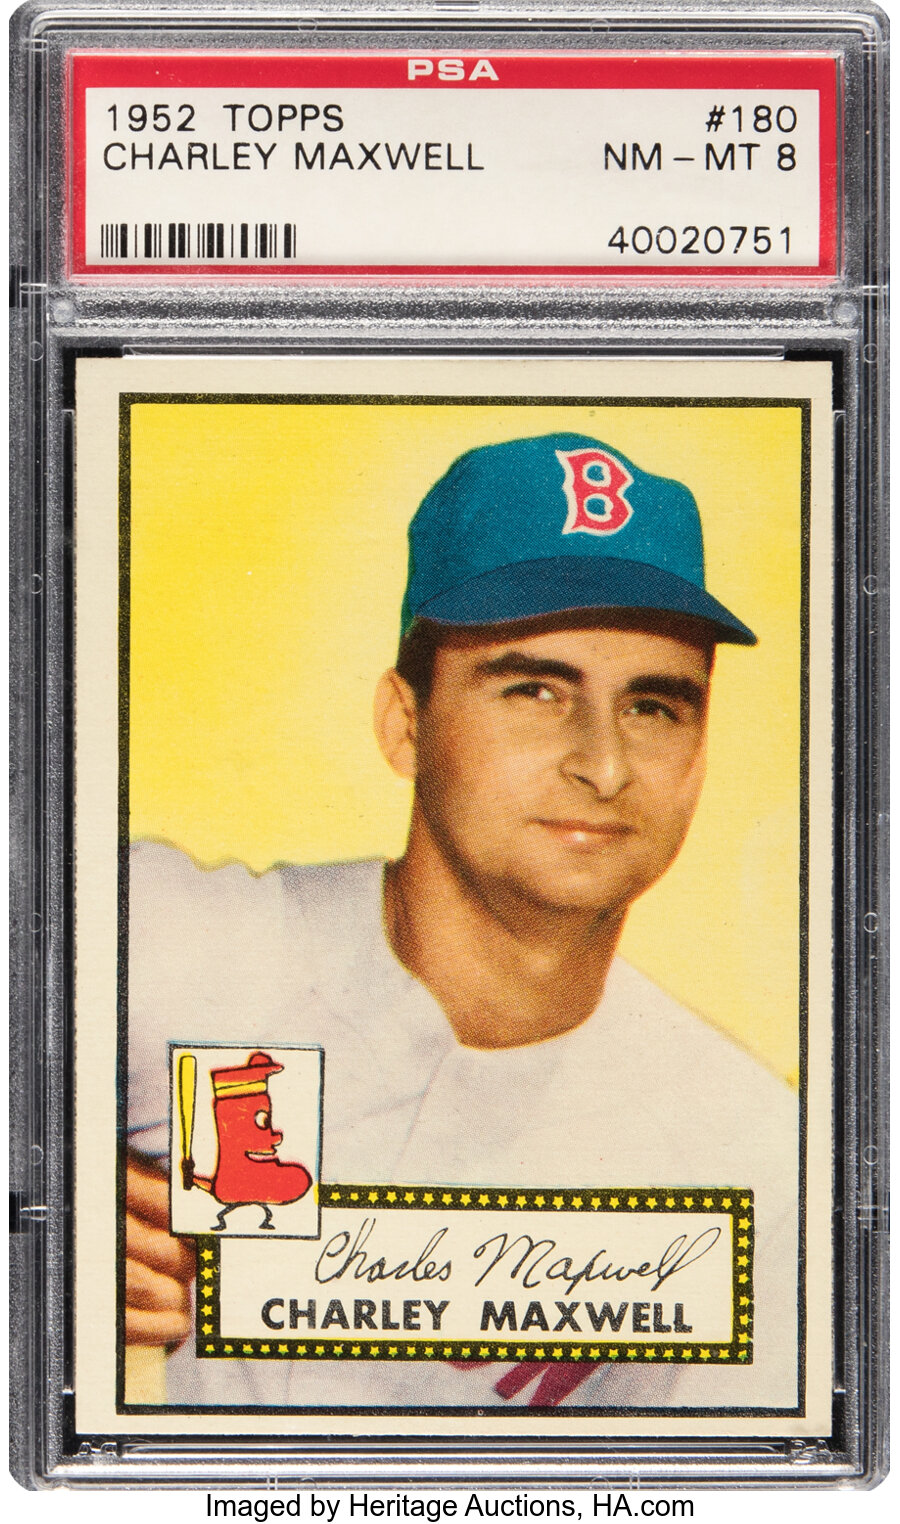 1952 Topps Charley Maxwell Rookie #180 PSA NM-MT 8 - Four Higher!